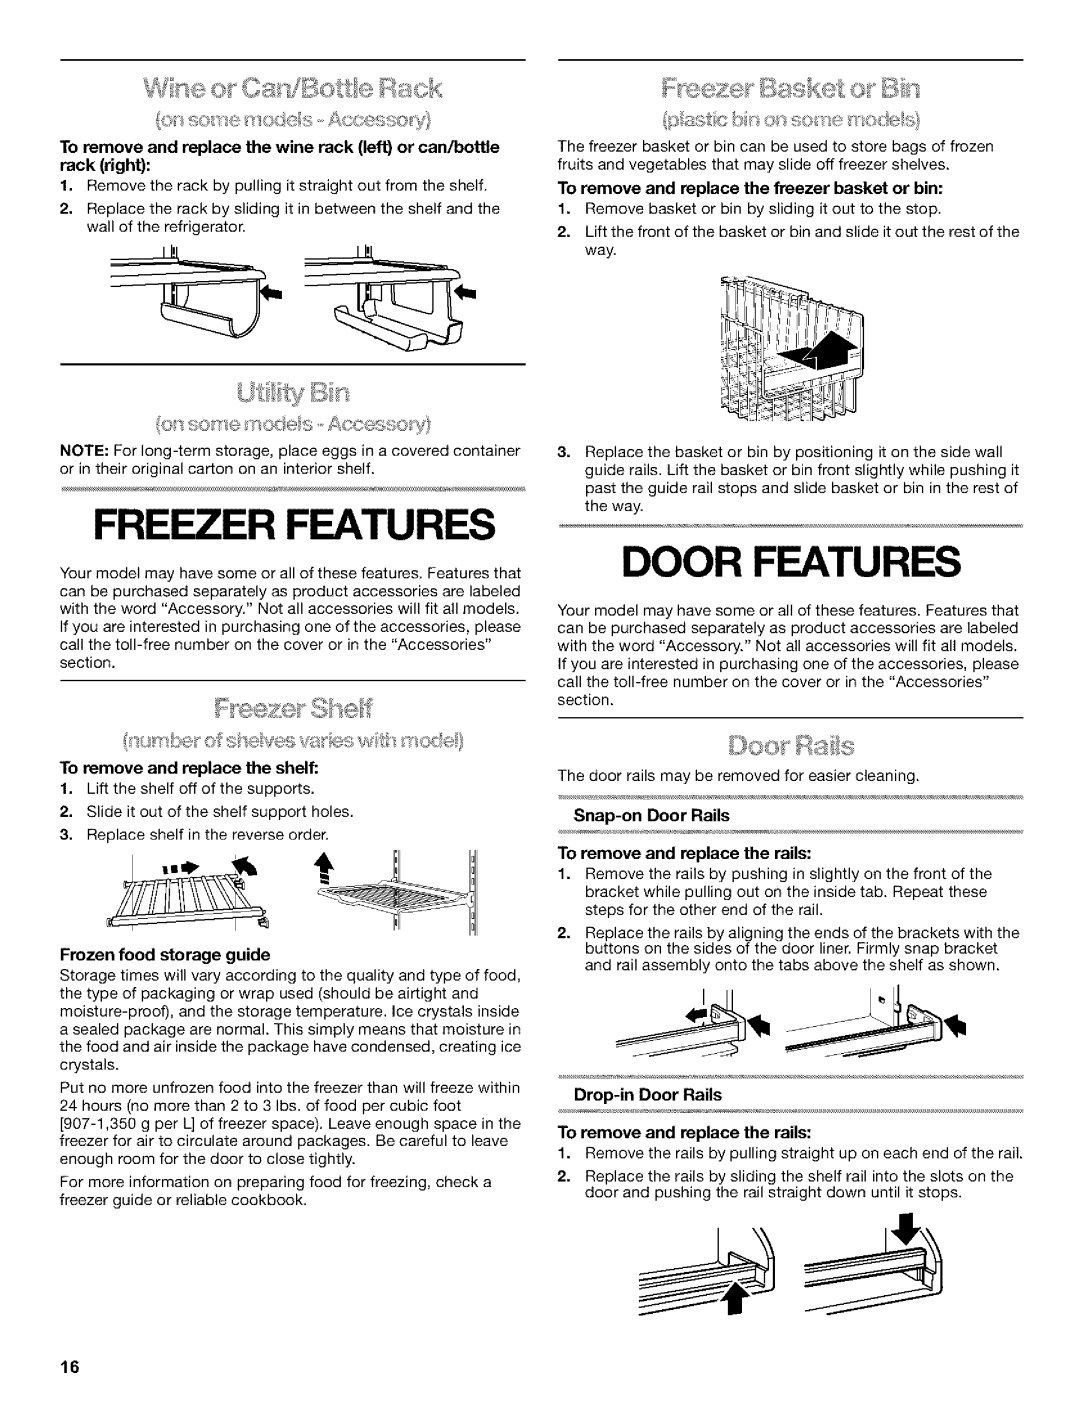 Kenmore 10652762100 Door Features, Ca JB< Ate, o s sxSes-Accessoy, TO remove and replace the freezer basket or bin 